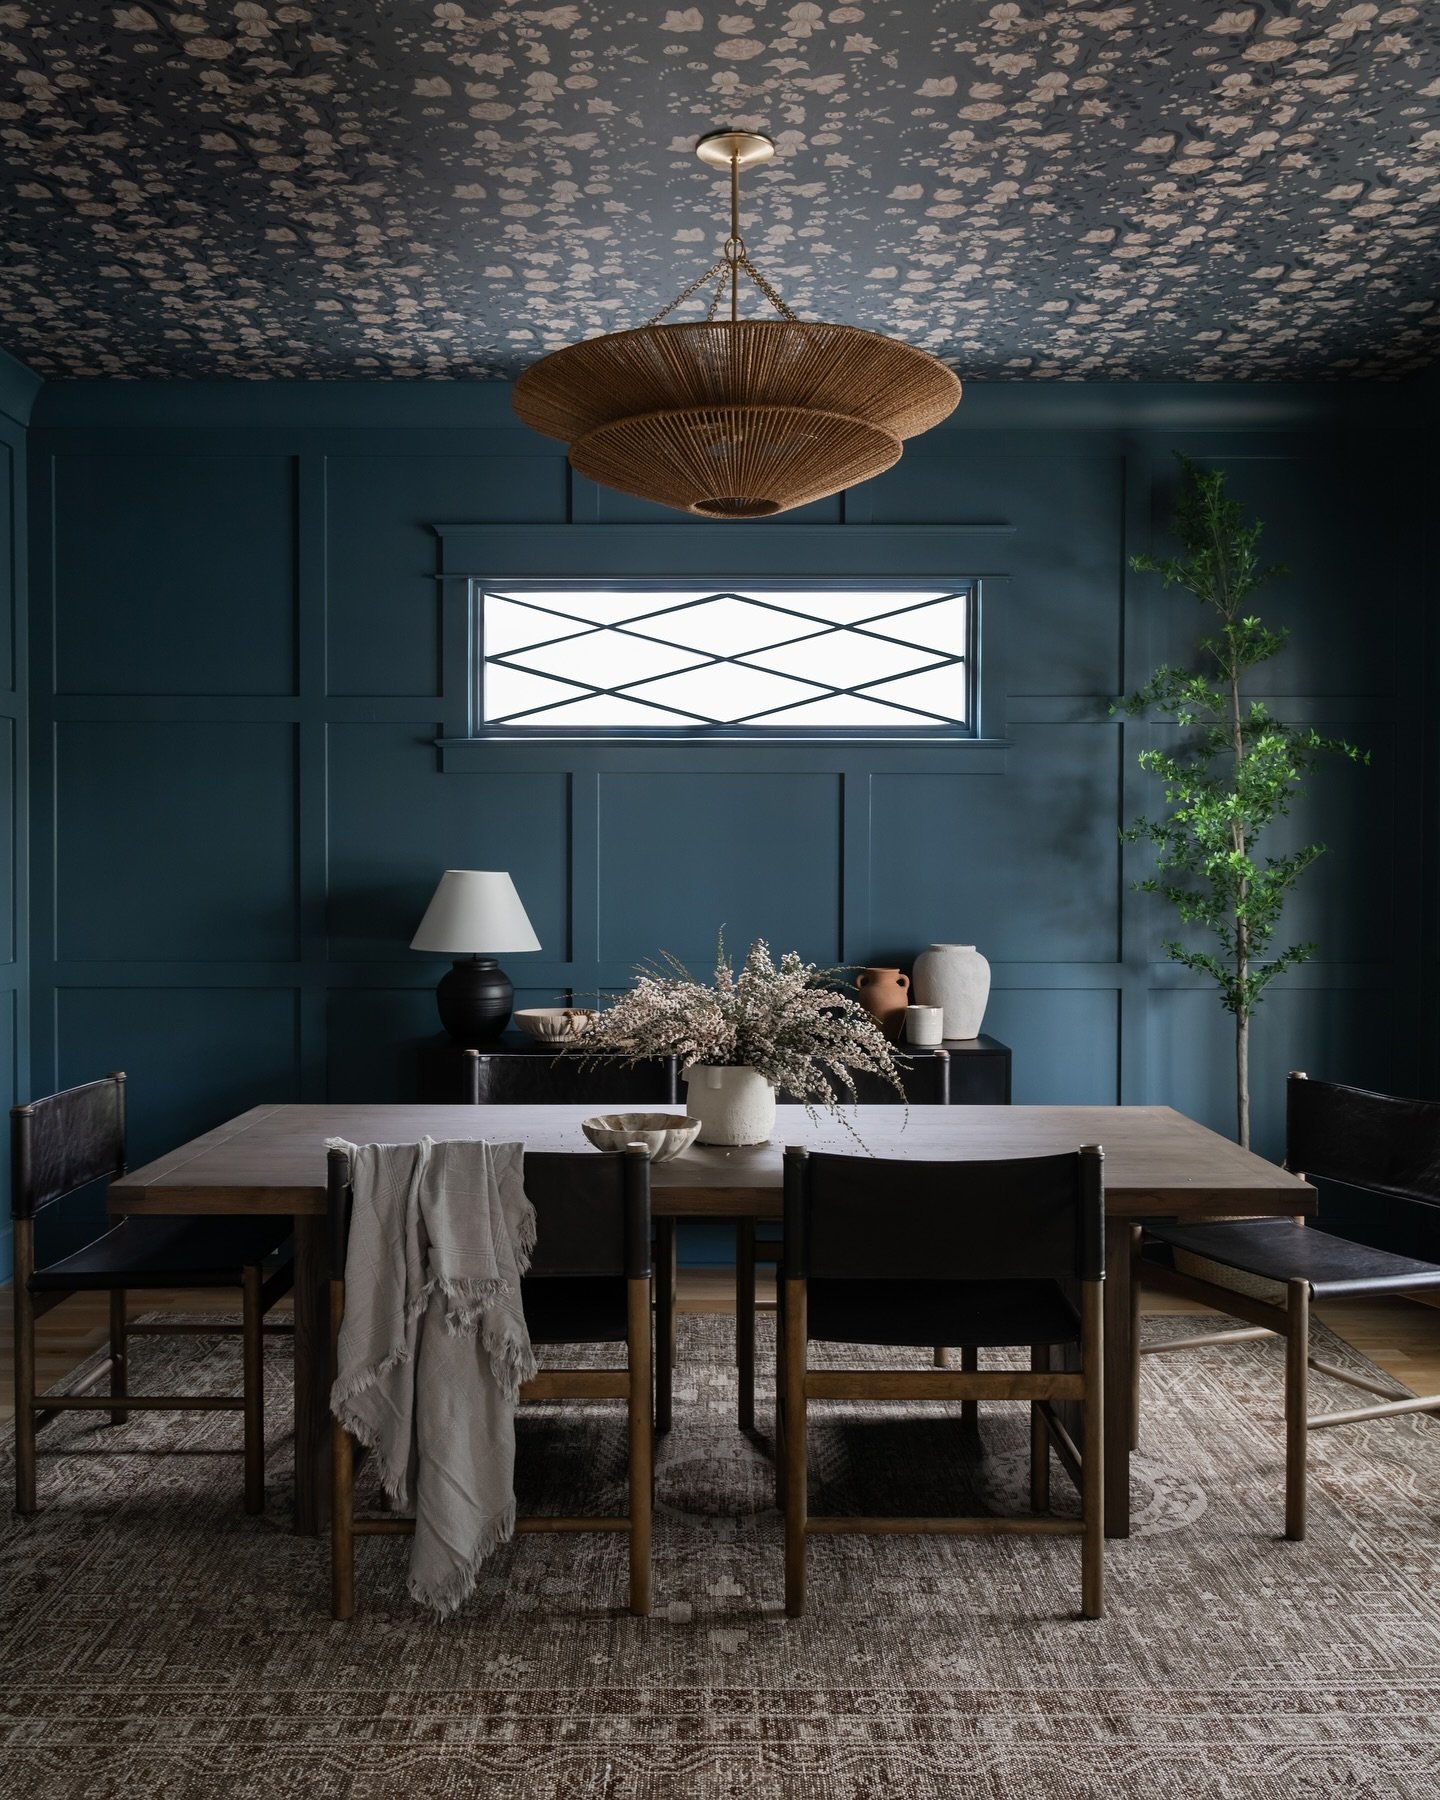 Rich saturated color and a moody vibe can coexist, peep that wallpapered ceiling too! I love this recently photographed dining room, more to come! ✨

design // @elliotinteriors 
photo // @allisonelefantephoto